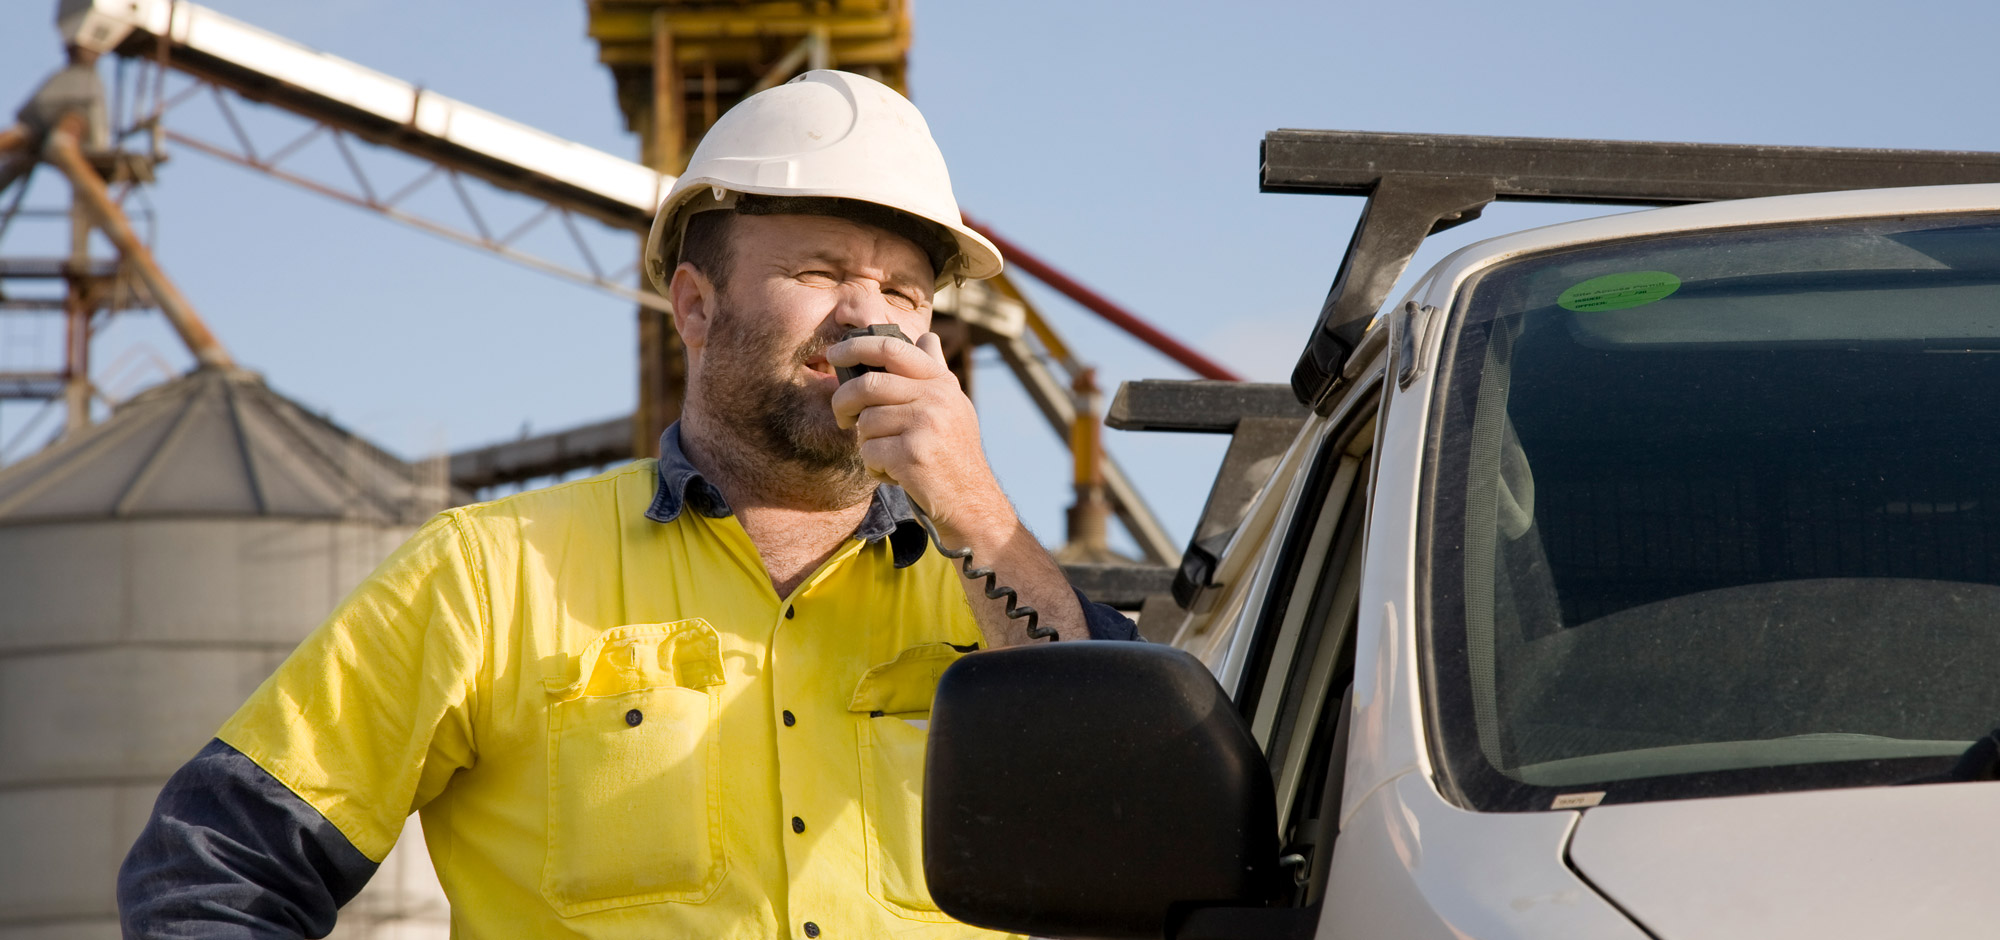 What can a two-way radio do better than my mobile phone?